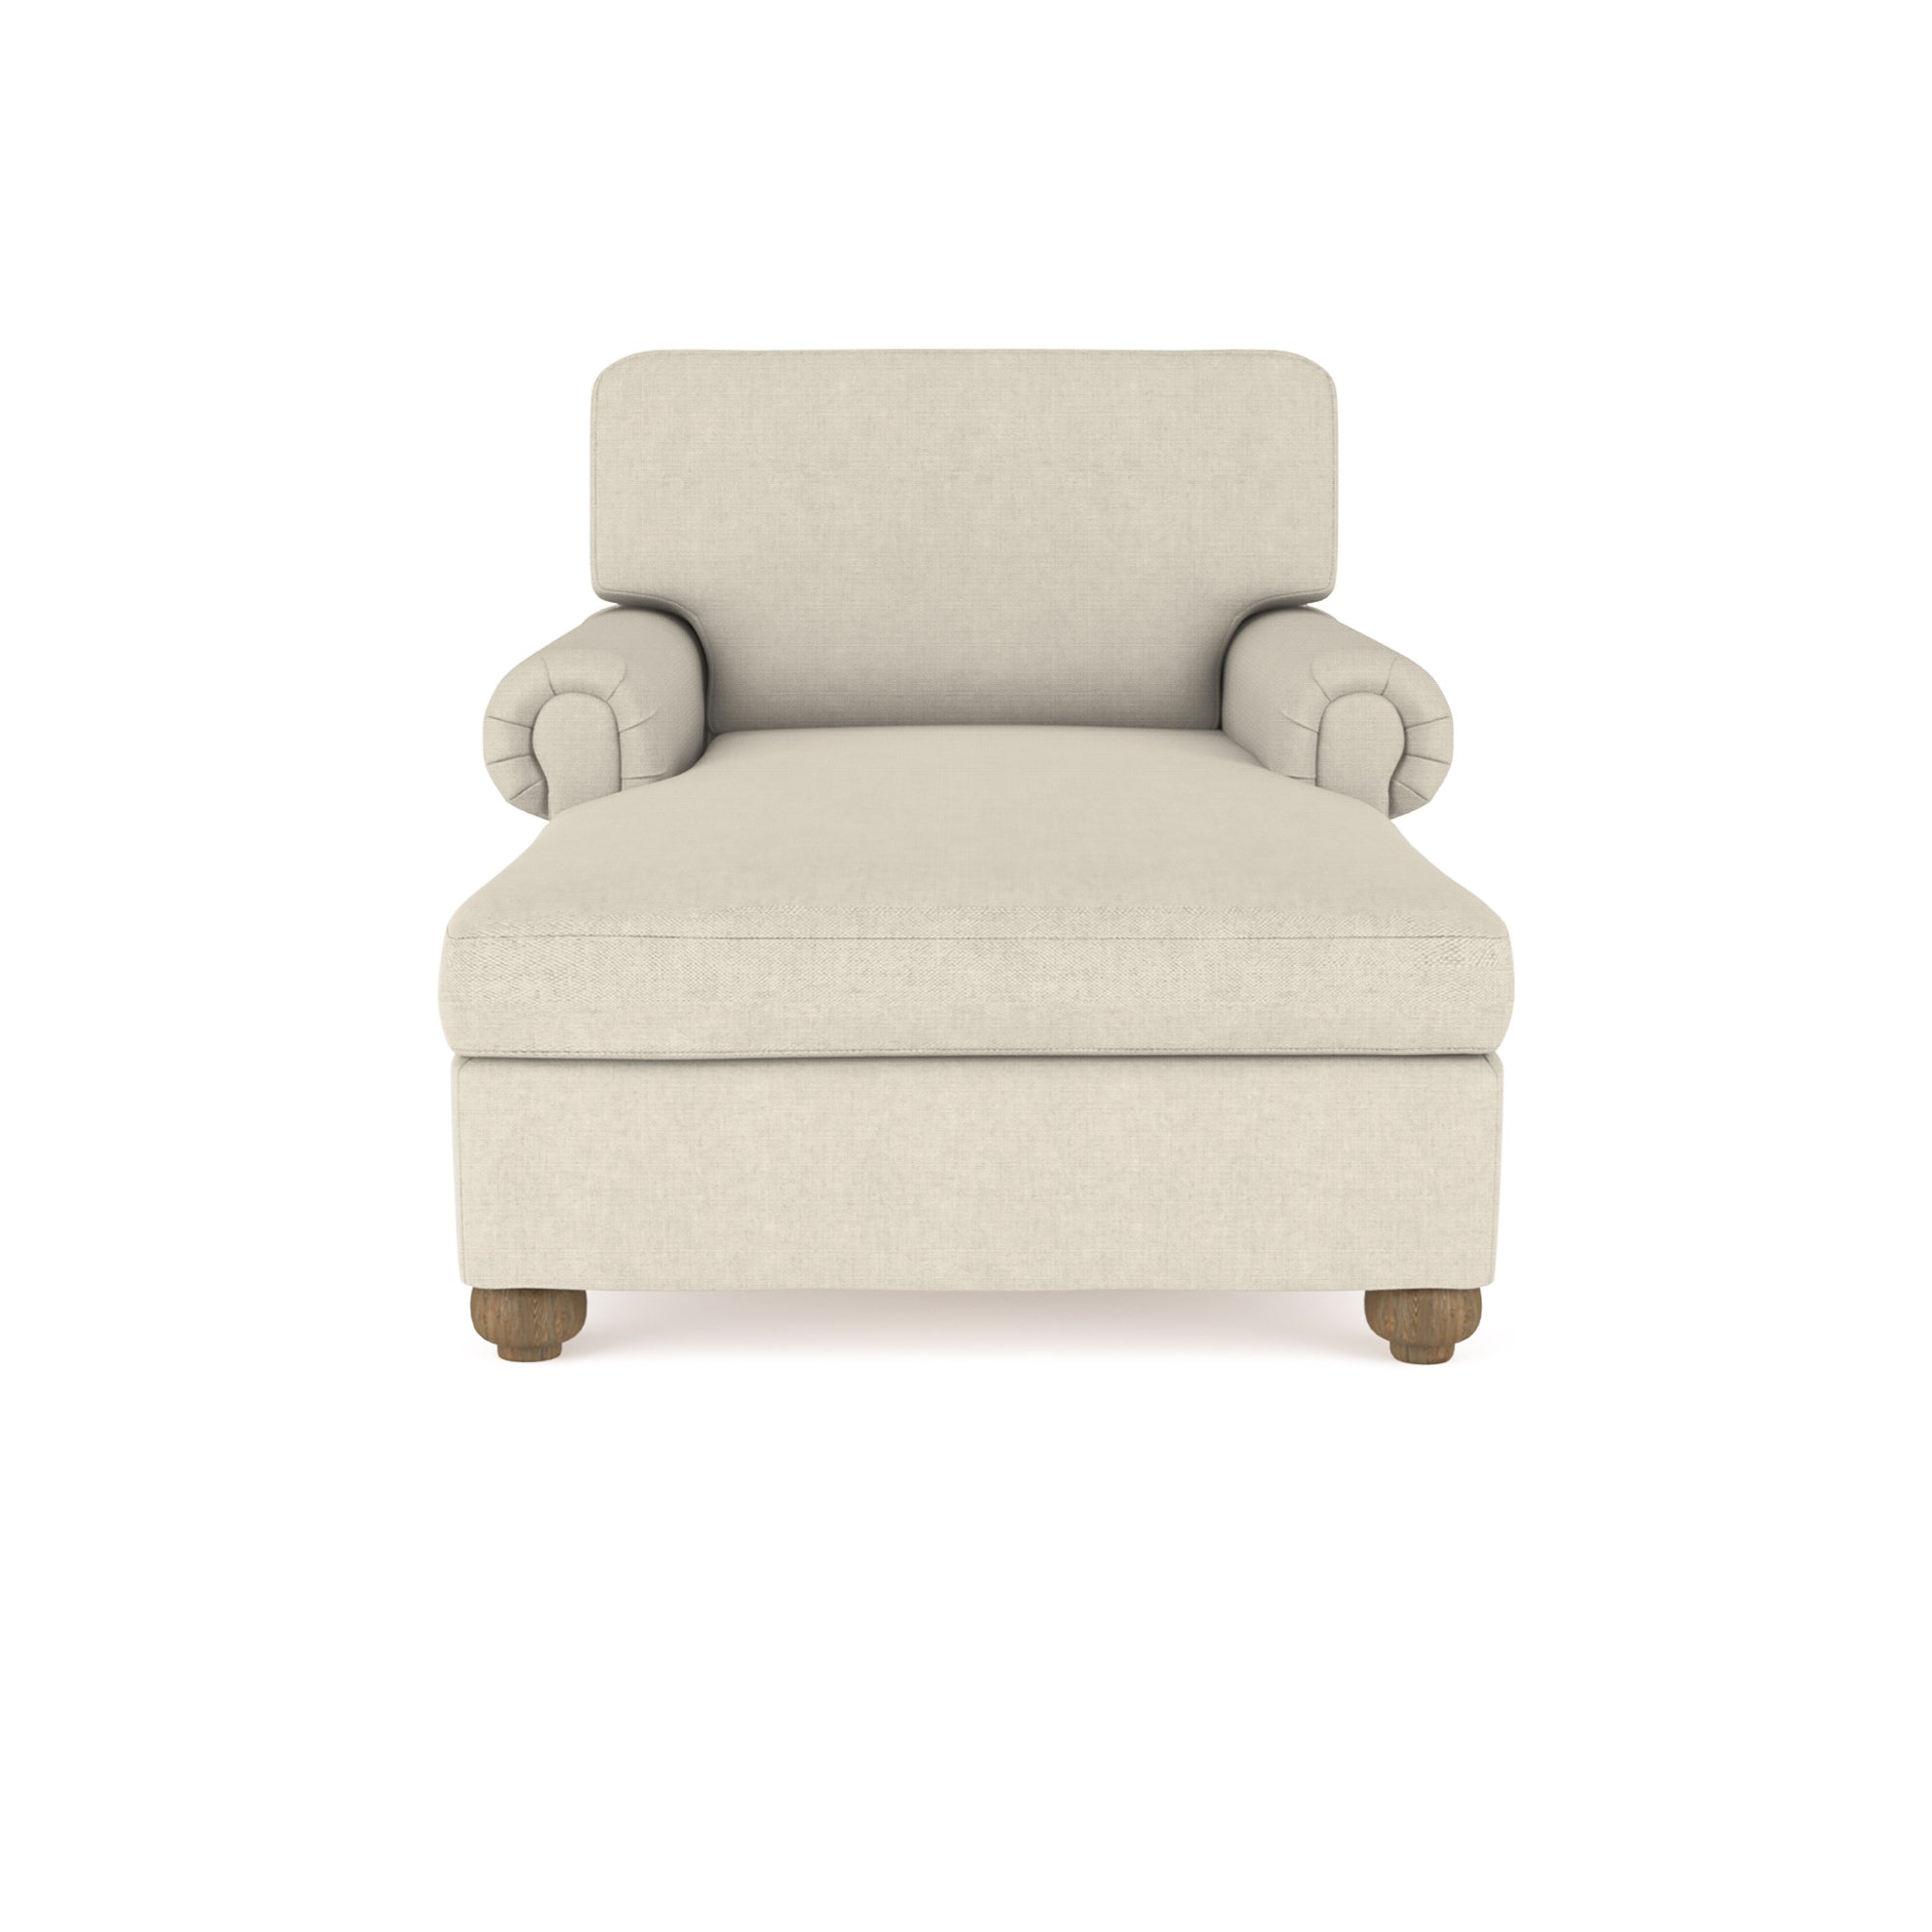 Leroy Chaise - Oyster Box Weave Linen